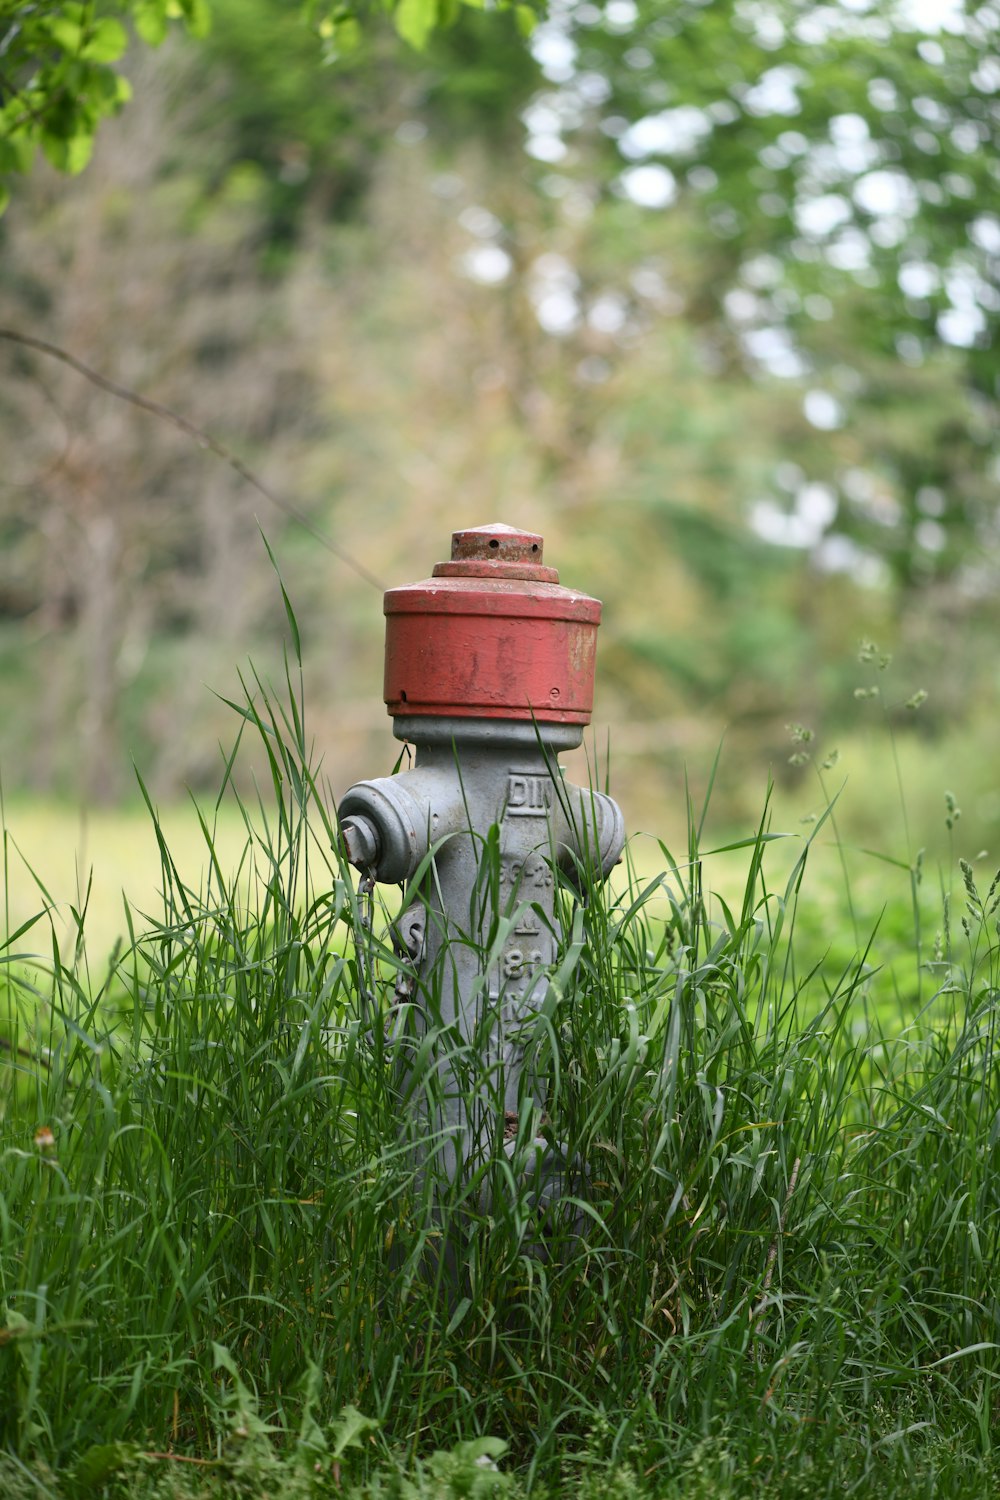 red and gray fire hydrant on green grass field during daytime